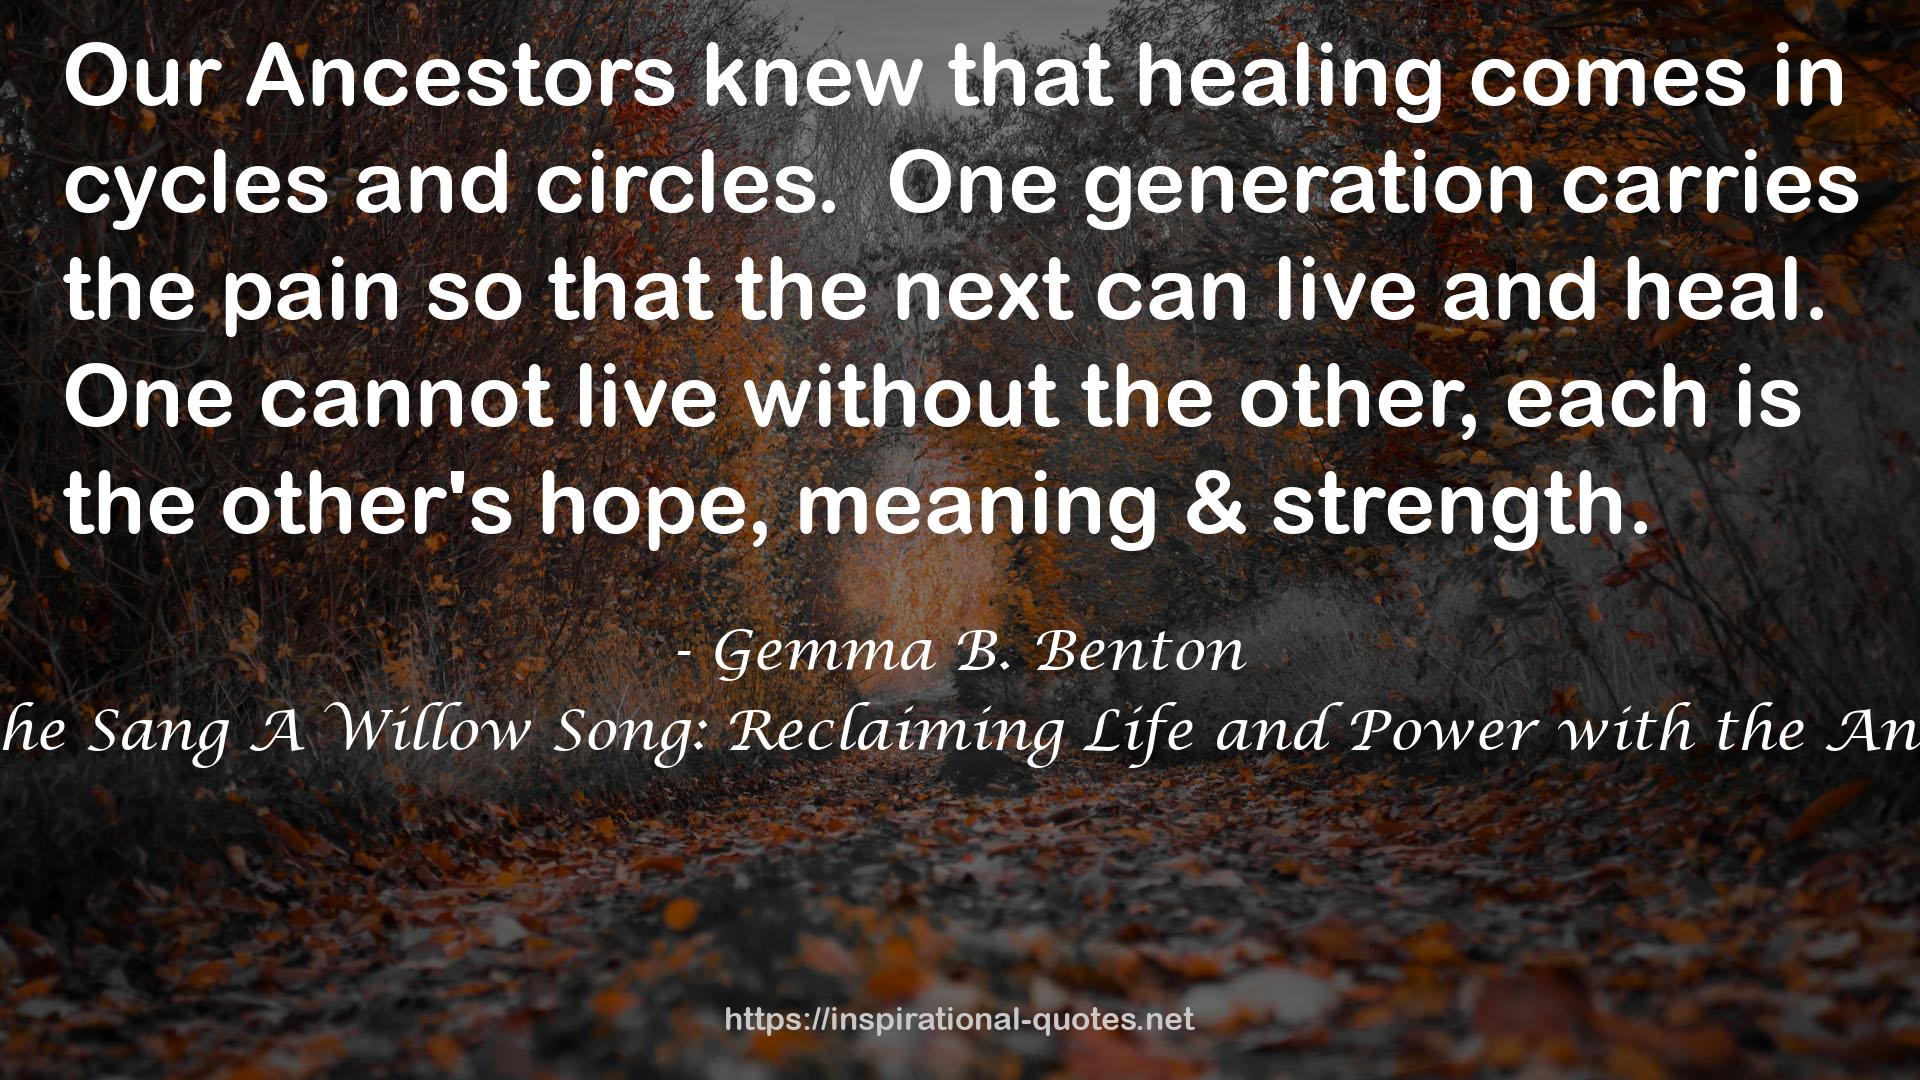 Then She Sang A Willow Song: Reclaiming Life and Power with the Ancestors QUOTES